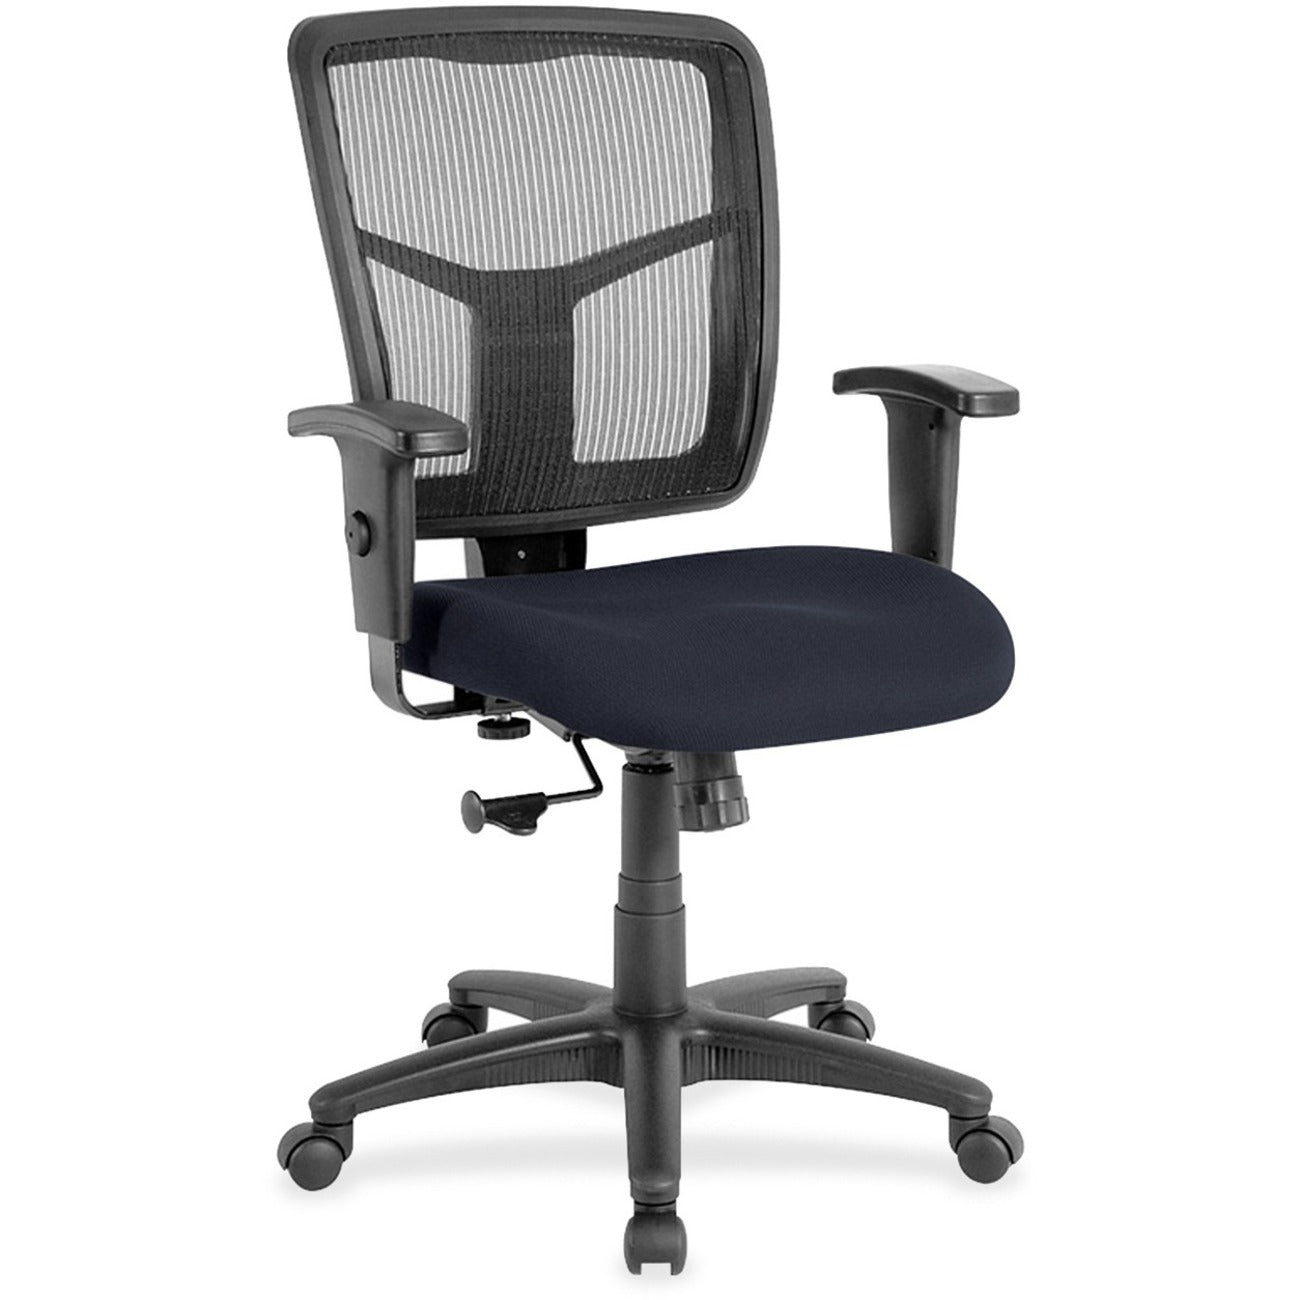 lorell-ergomesh-managerial-mesh-mid-back-chair-perfection-navy-fabric-seat-black-back-black-frame-5-star-base-1-each_llr8620966 - 1